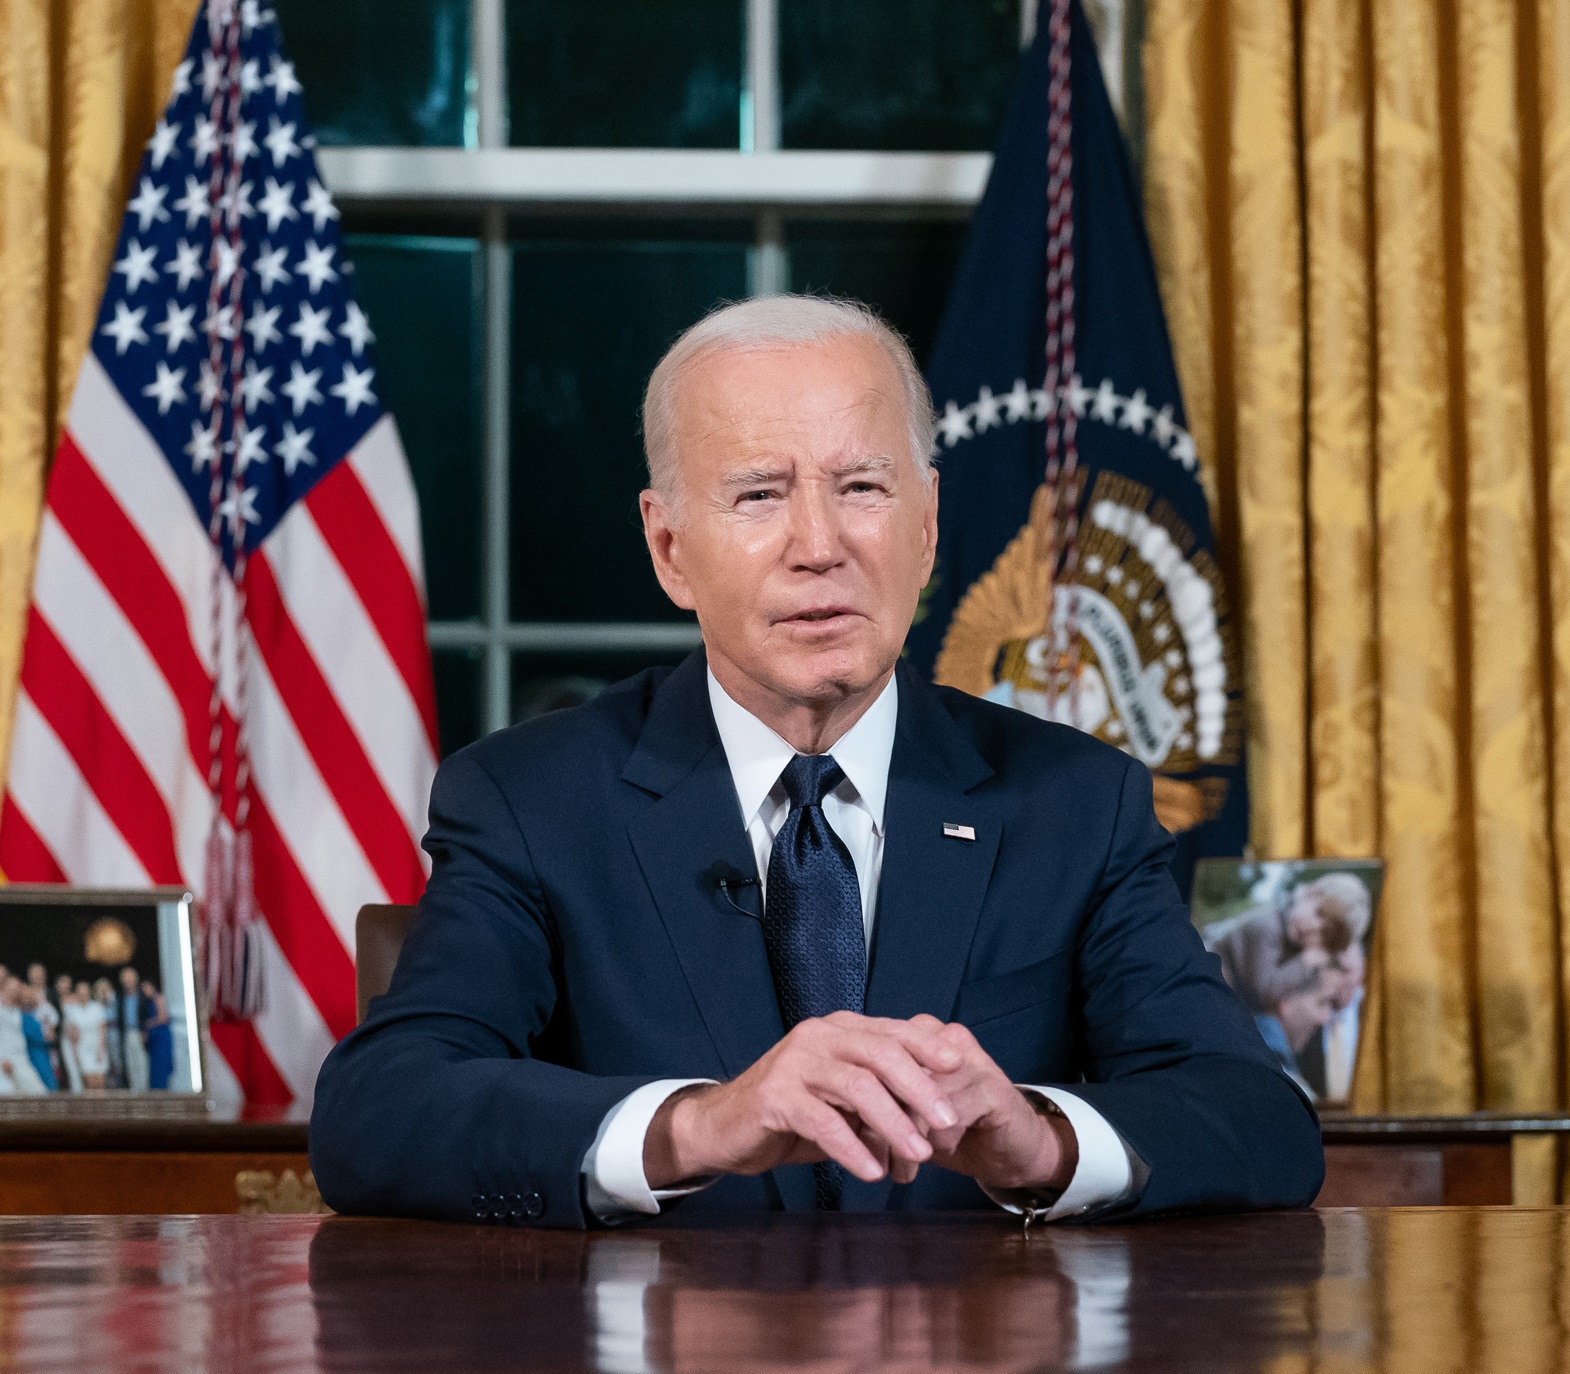 US President Joe Biden addressing the country from the Oval Office in The White House on the Middle East and Ukraine, 19-10-23